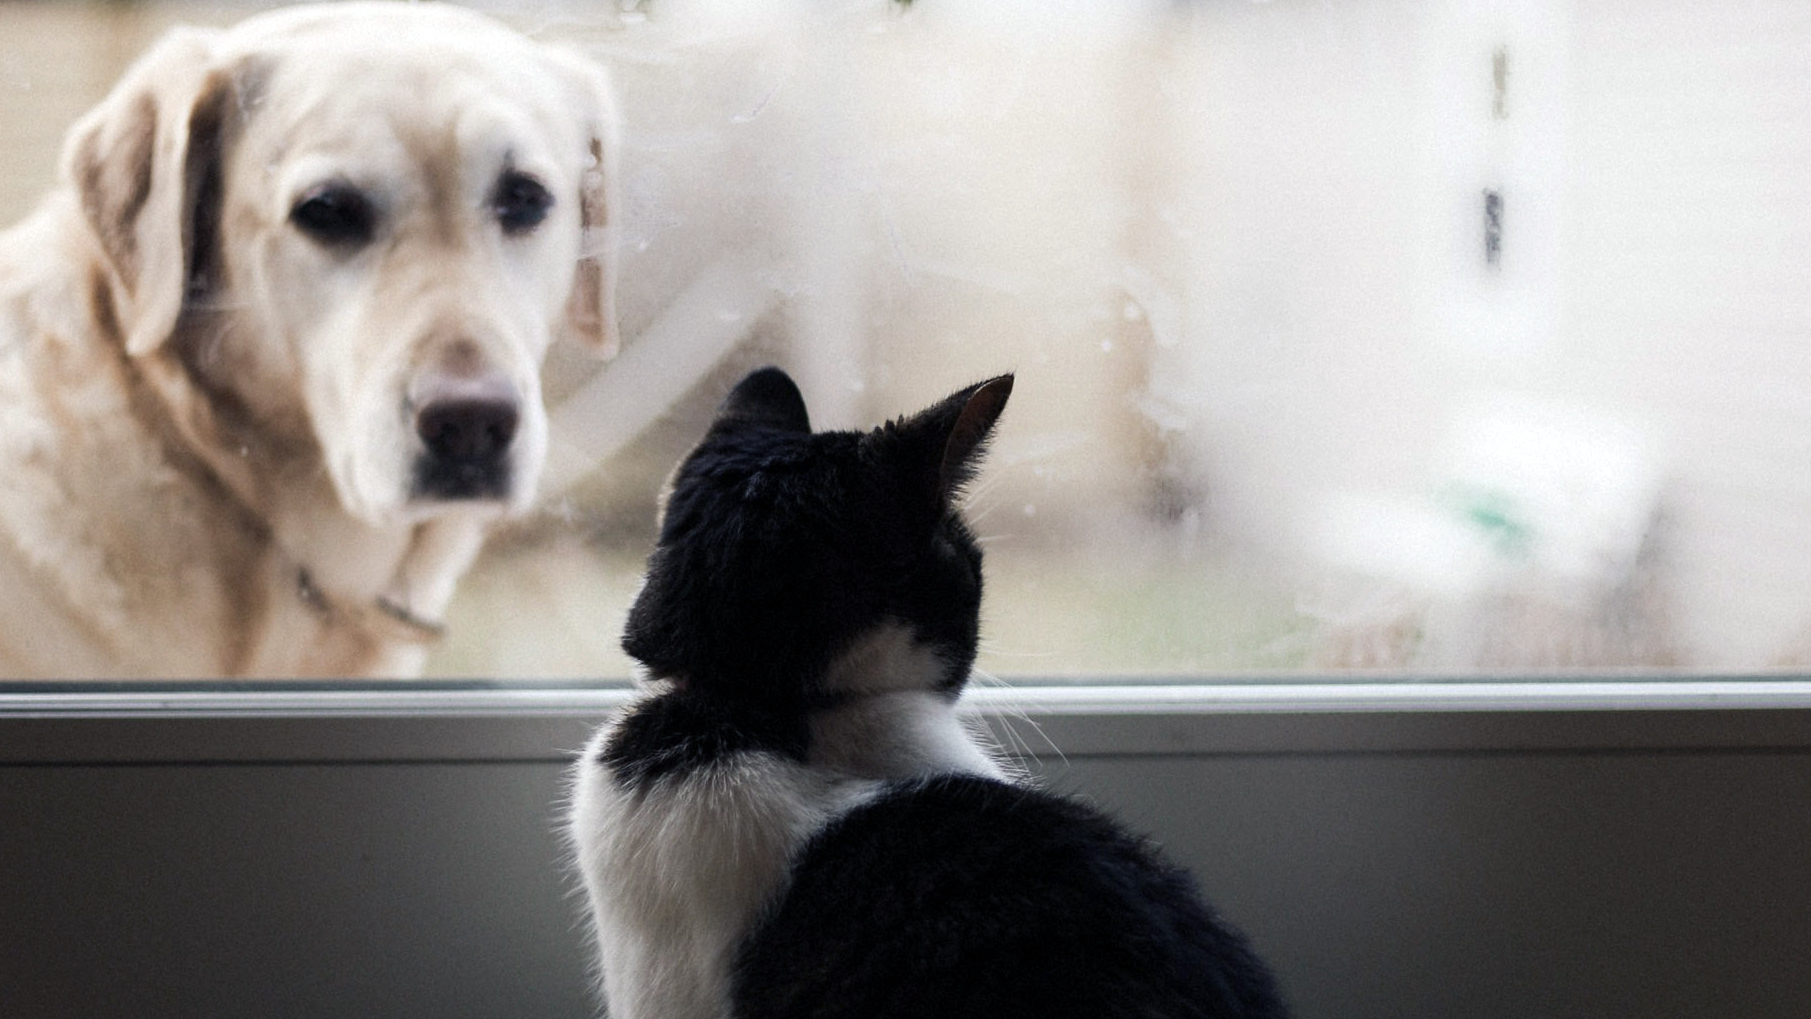 A dog looking through a window at a cat on the other side and the cat not caring